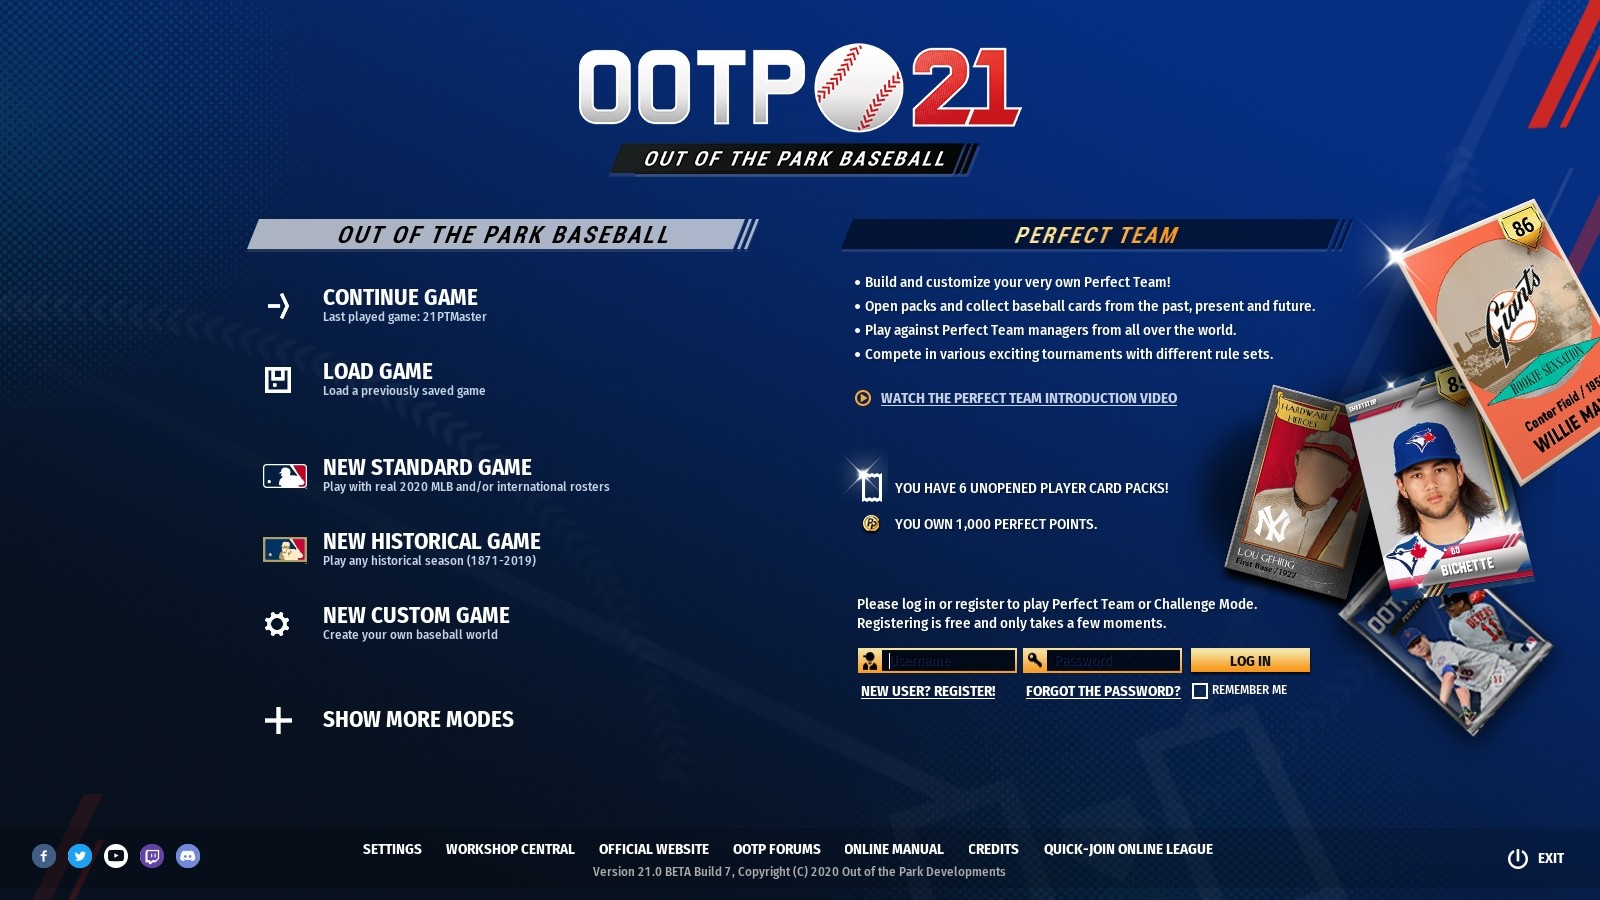 Find the best laptops for Out of the Park Baseball 21